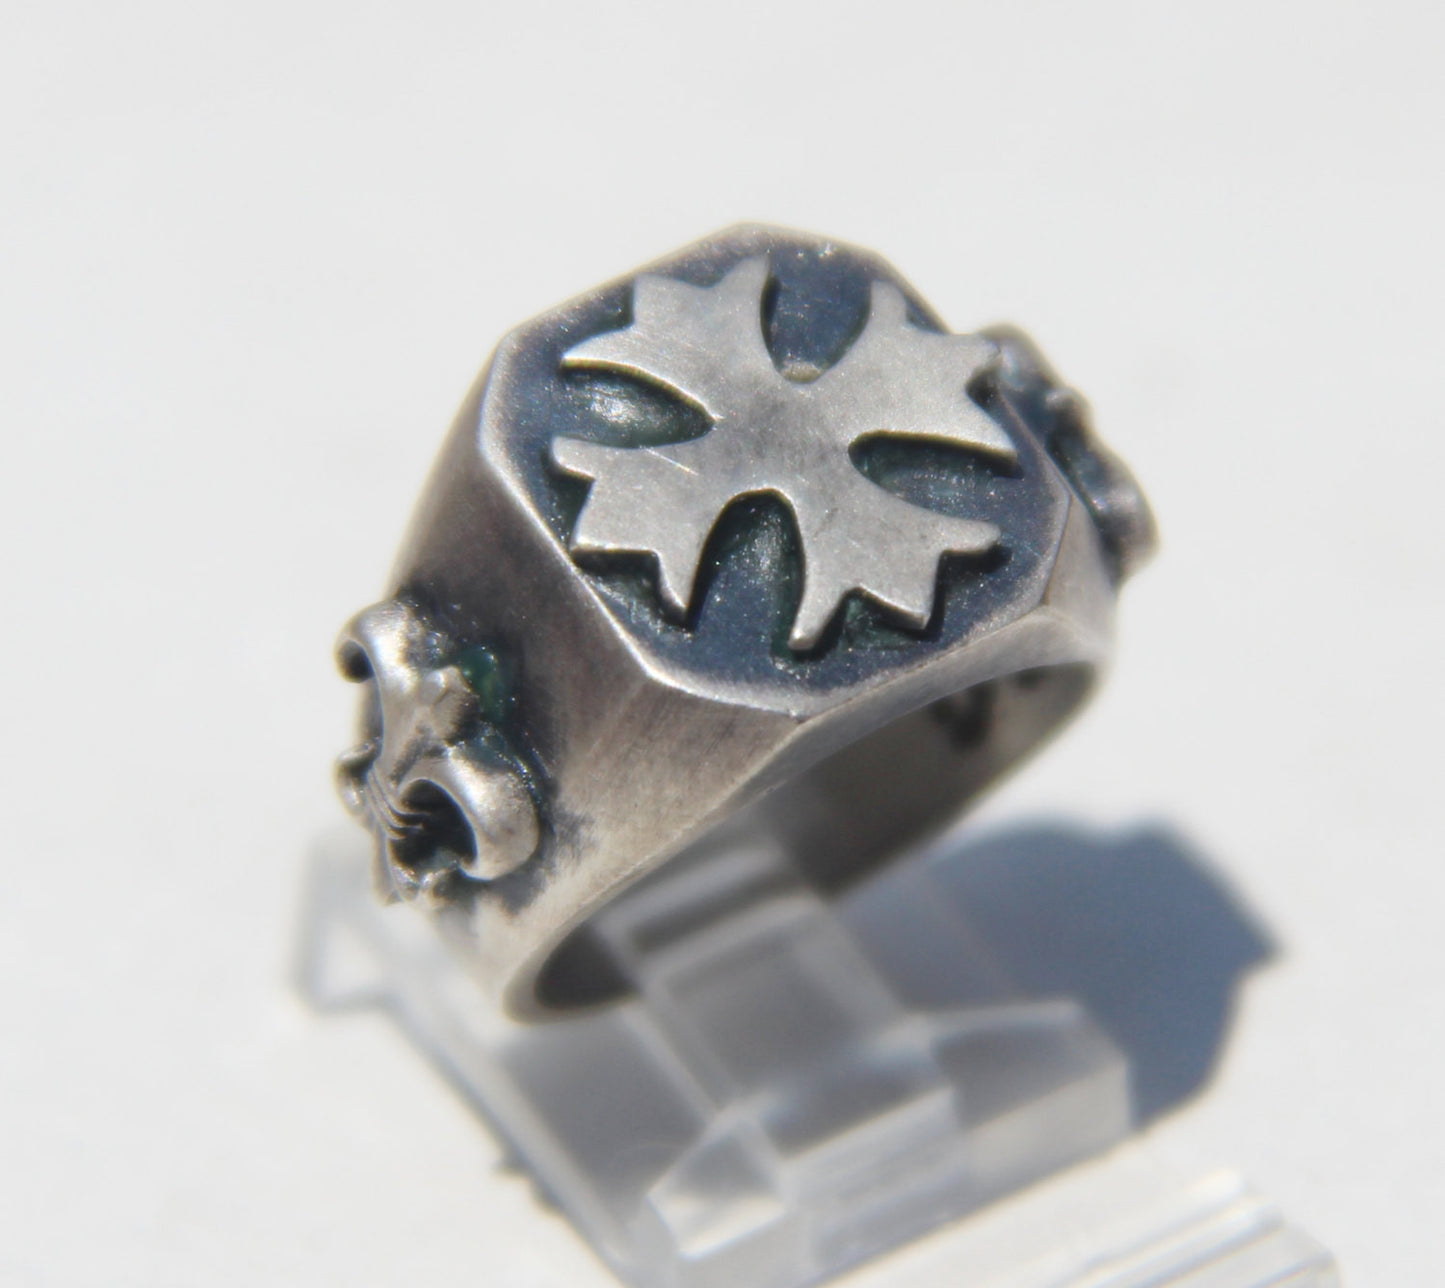 Until Death, Inc. Maltese Cross Signet Ring with Fleur De Lis Accents. Solid 925 Sterling Silver.